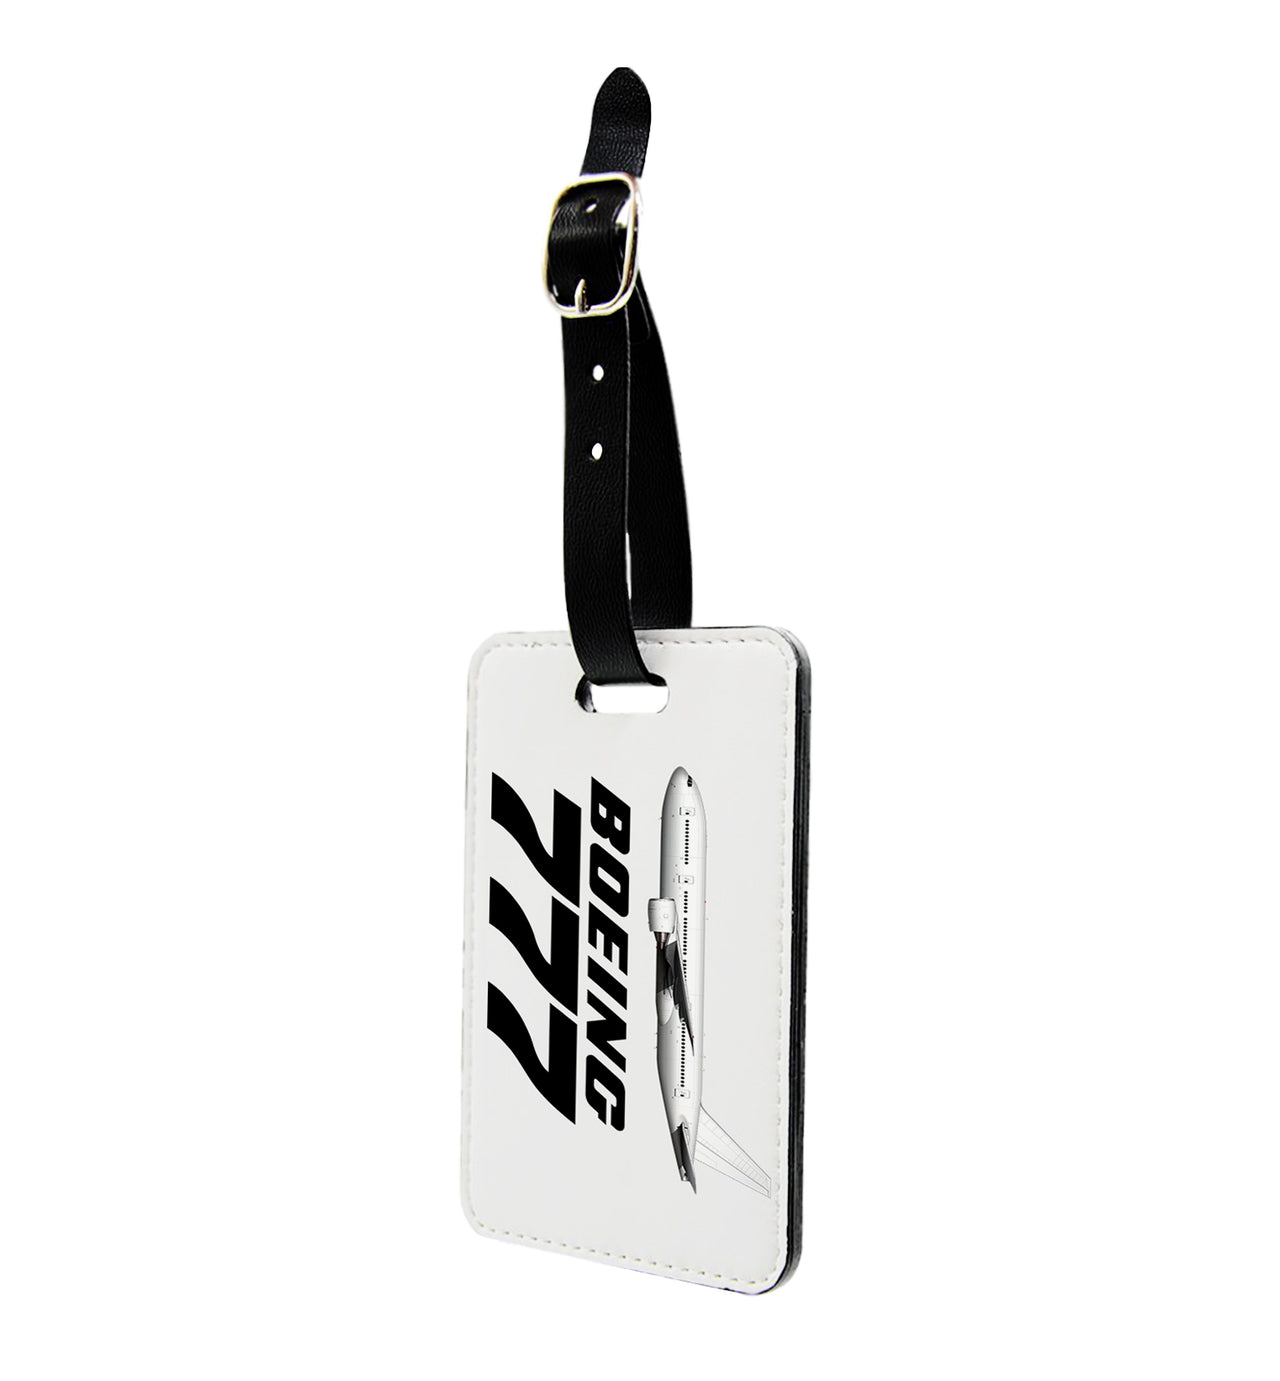 The Boeing 777 Designed Luggage Tag